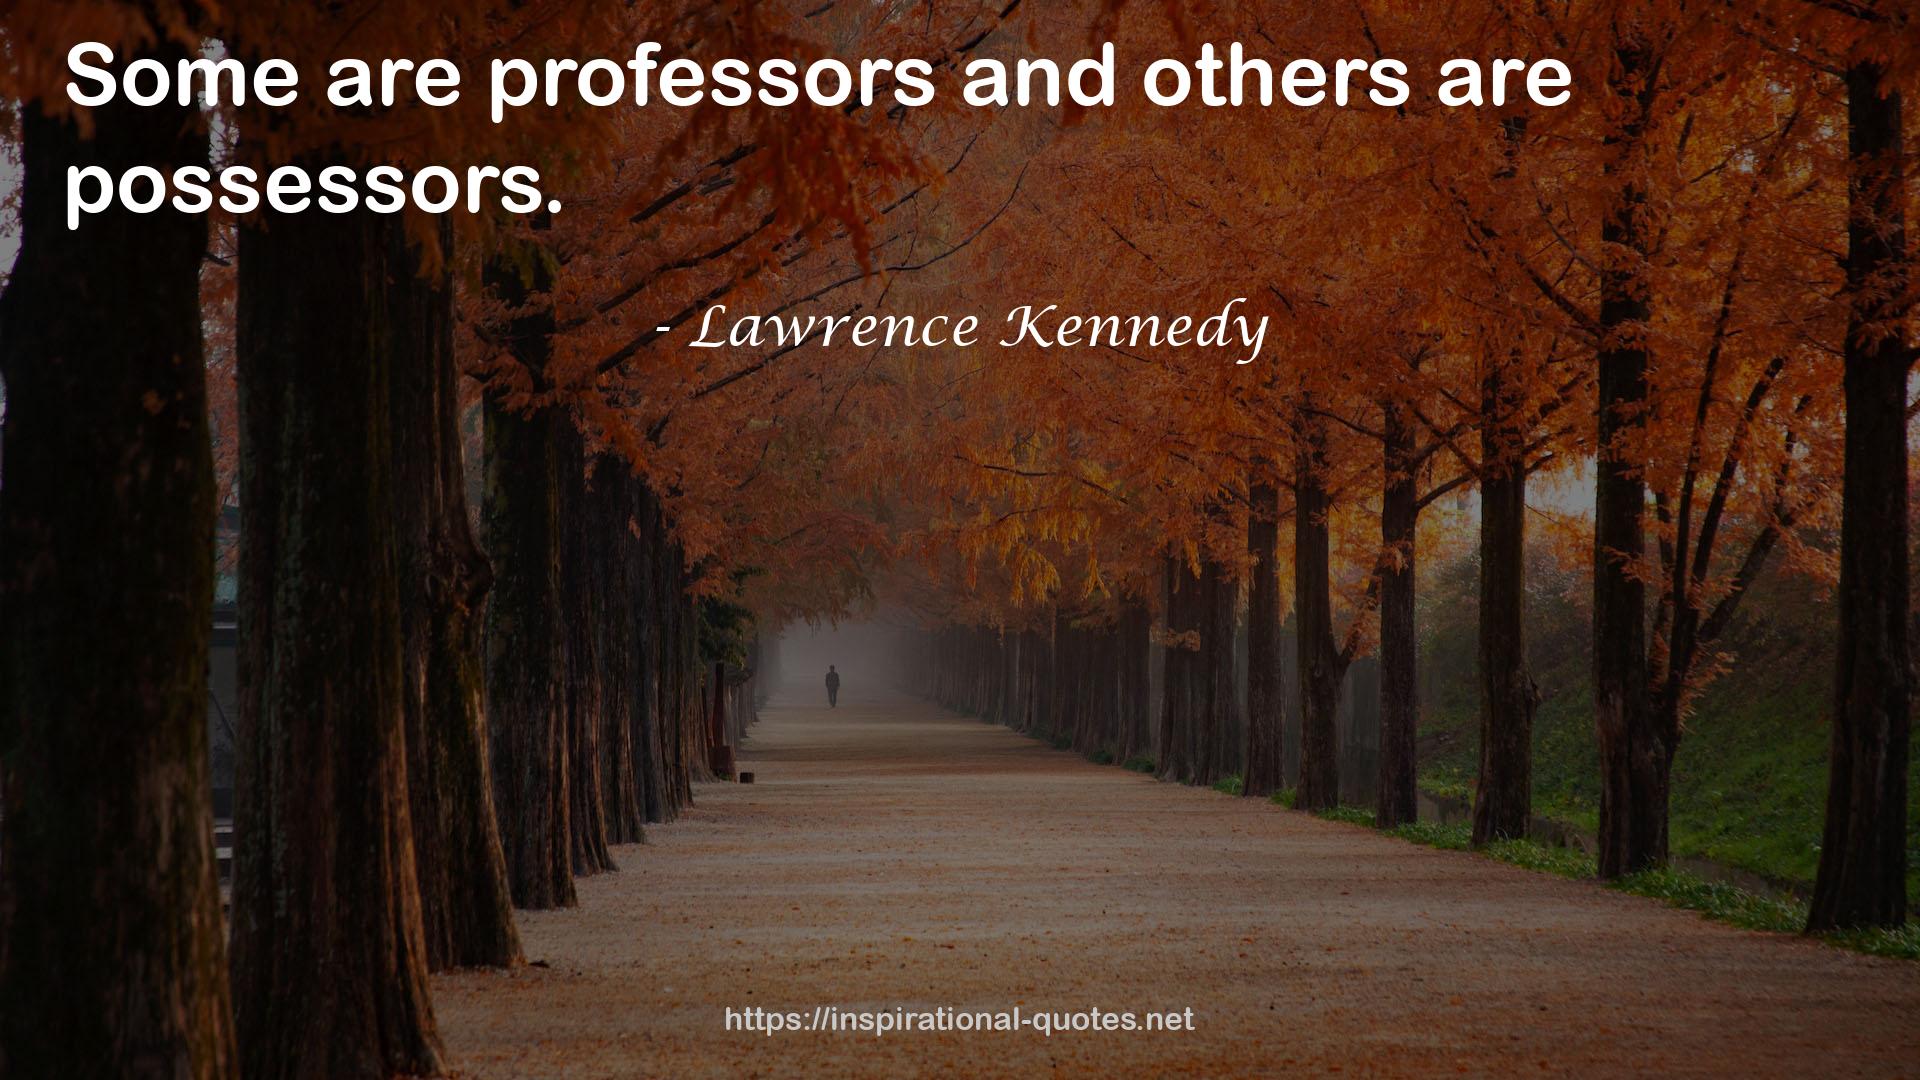 Lawrence Kennedy QUOTES